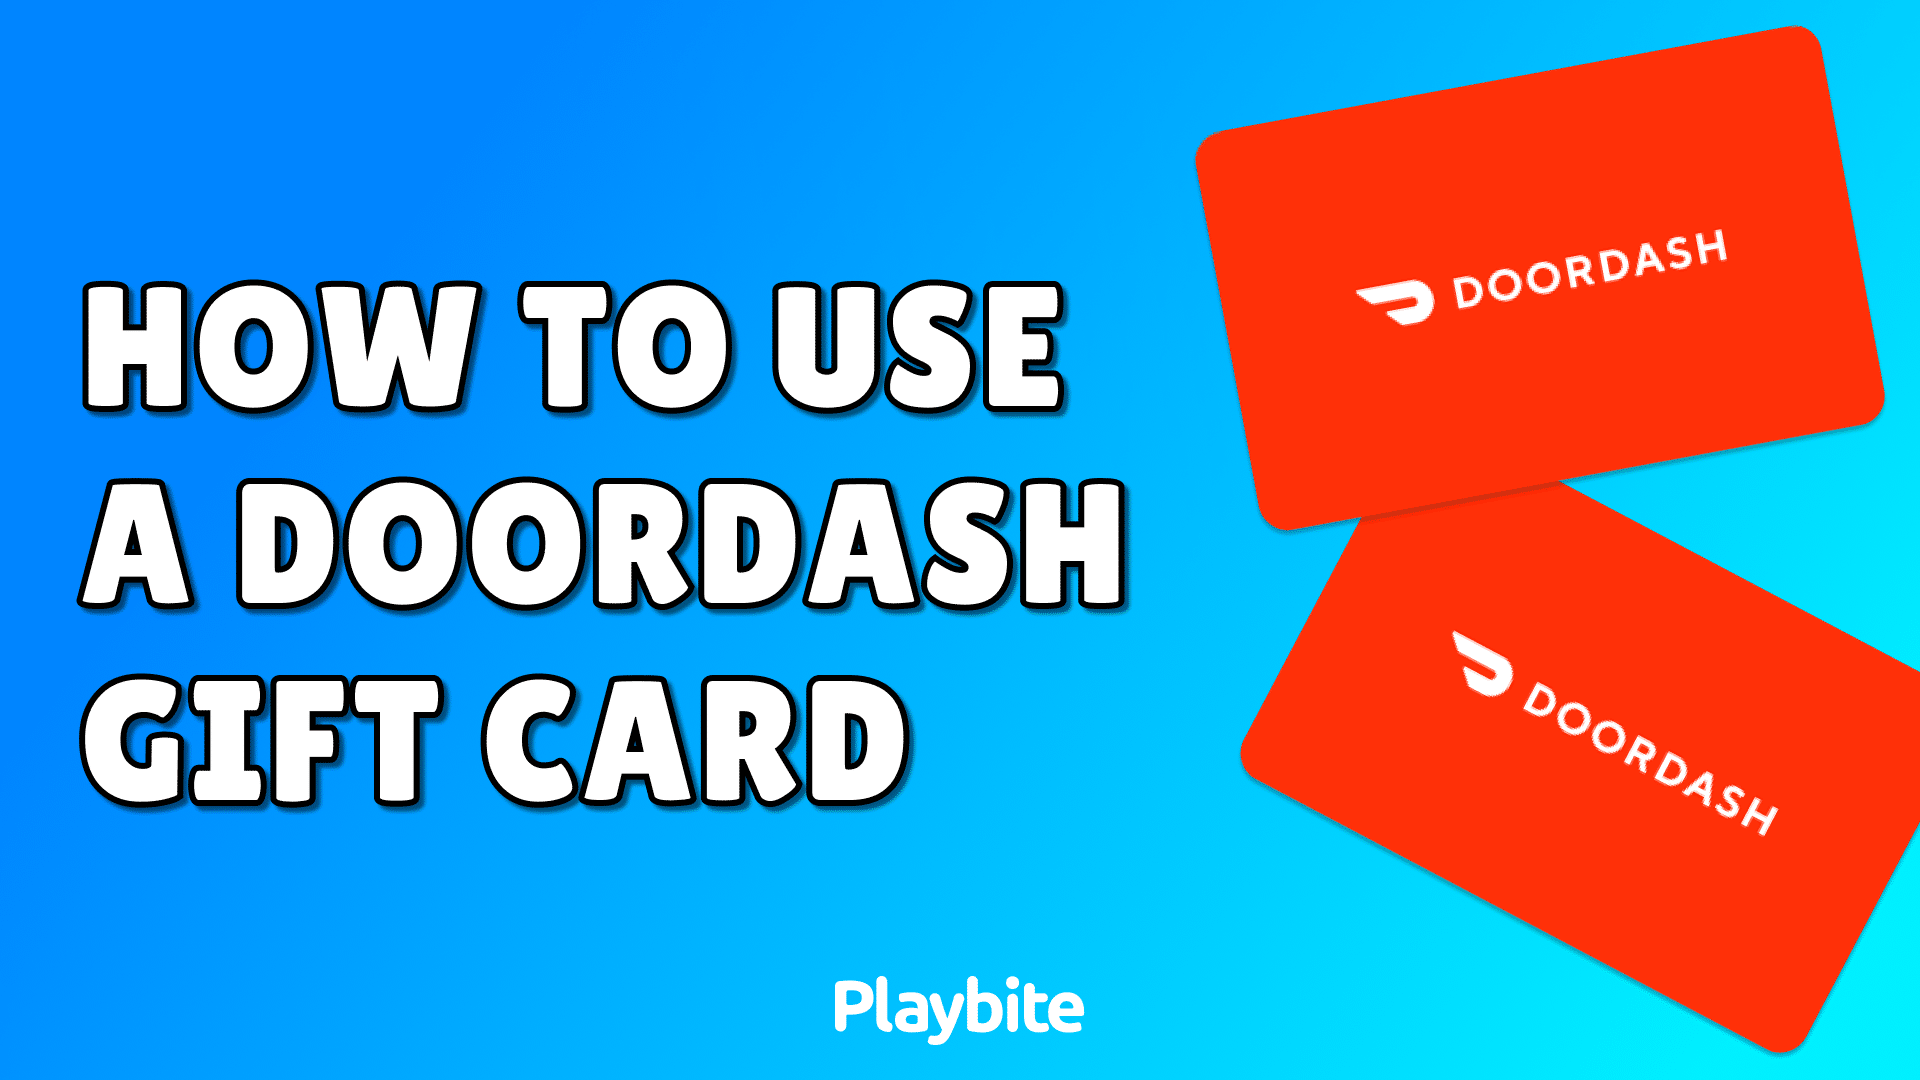 How To Use a DoorDash Gift Card?